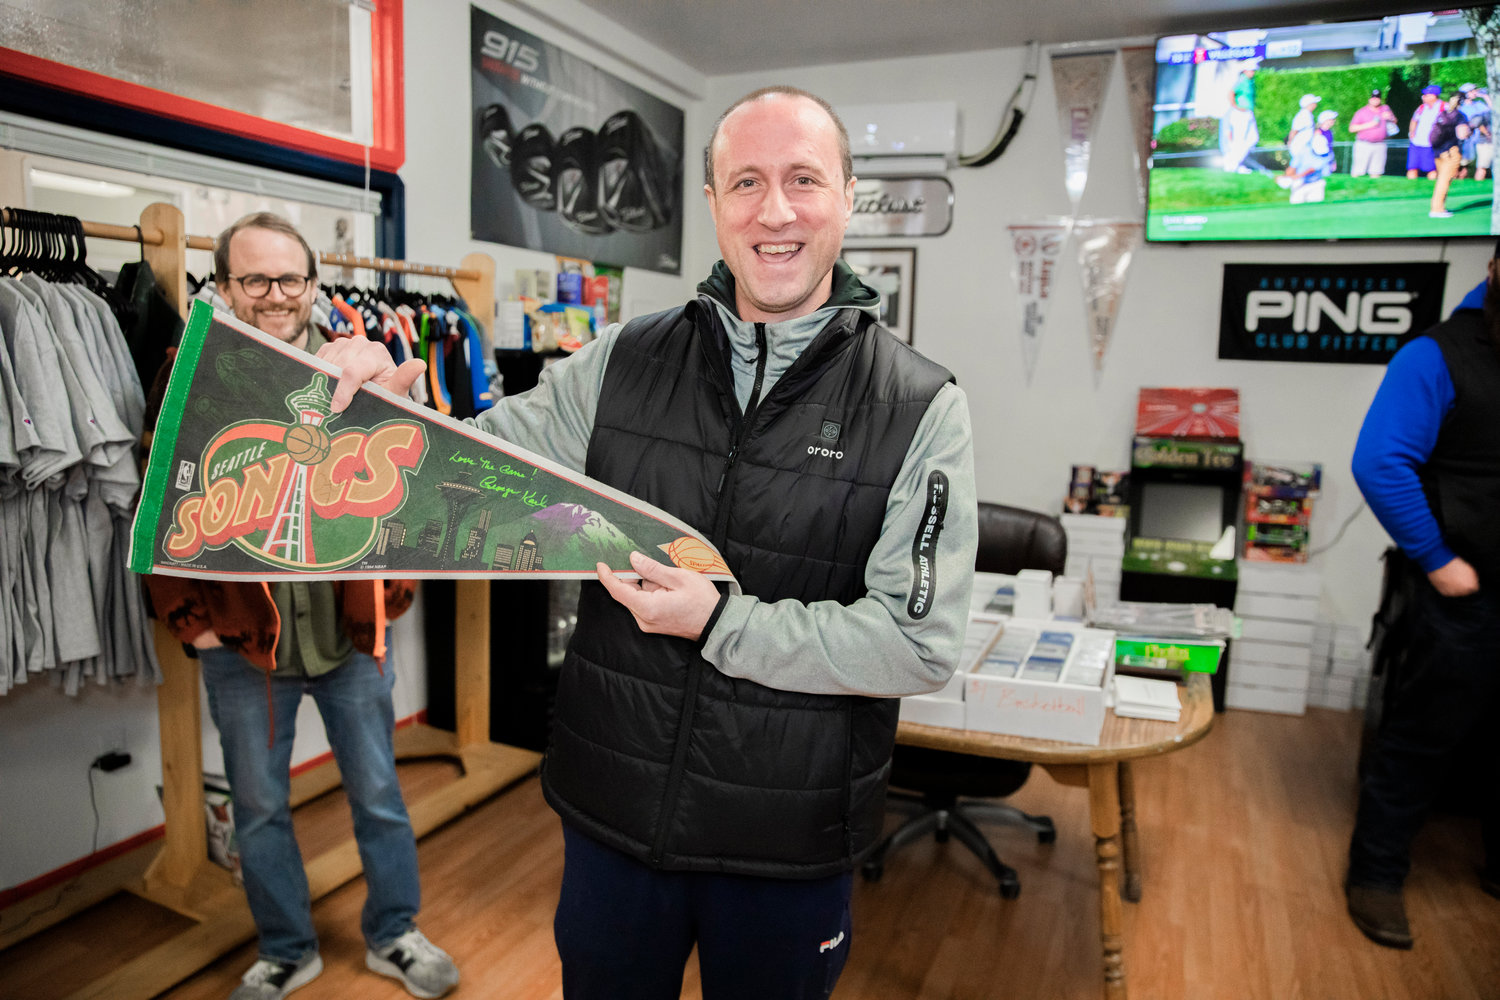 Ryan Guenther holds up a Seattle Sonics banner he has had for over 20 years, after it was autographed by George Karl on Friday, at Keiper’s Cards in Centralia.